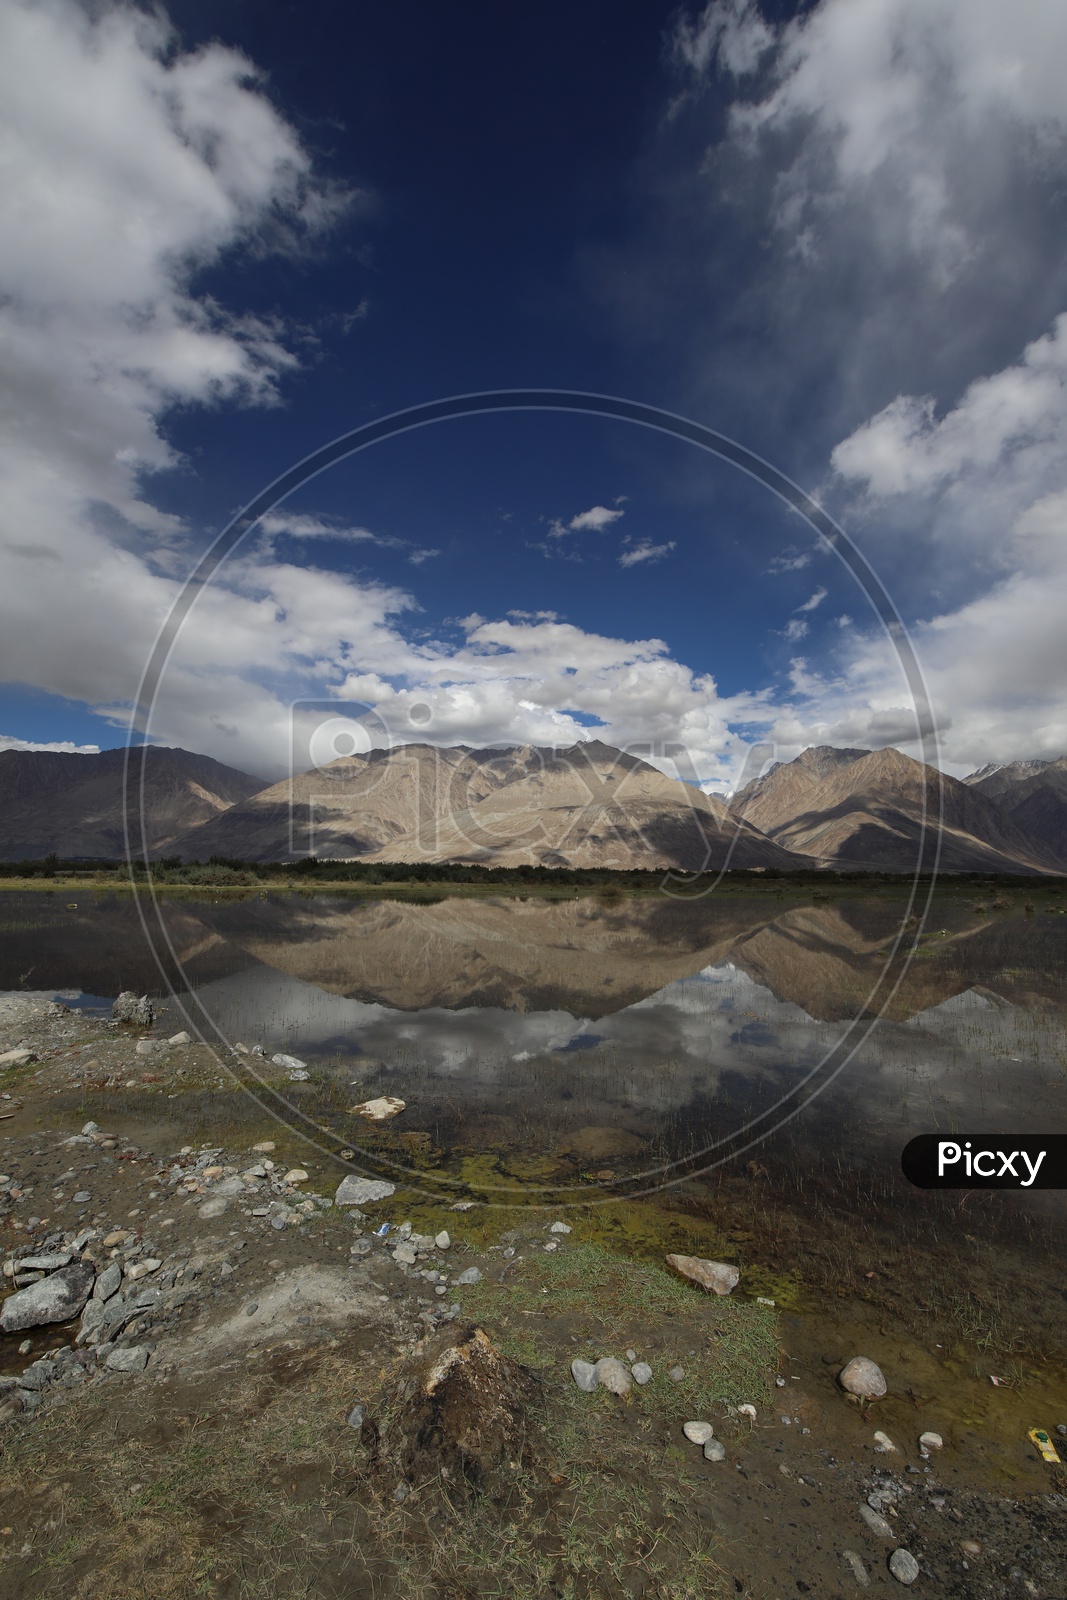 A Beautiful Reflection of Mountains in Water in River valleys of Leh